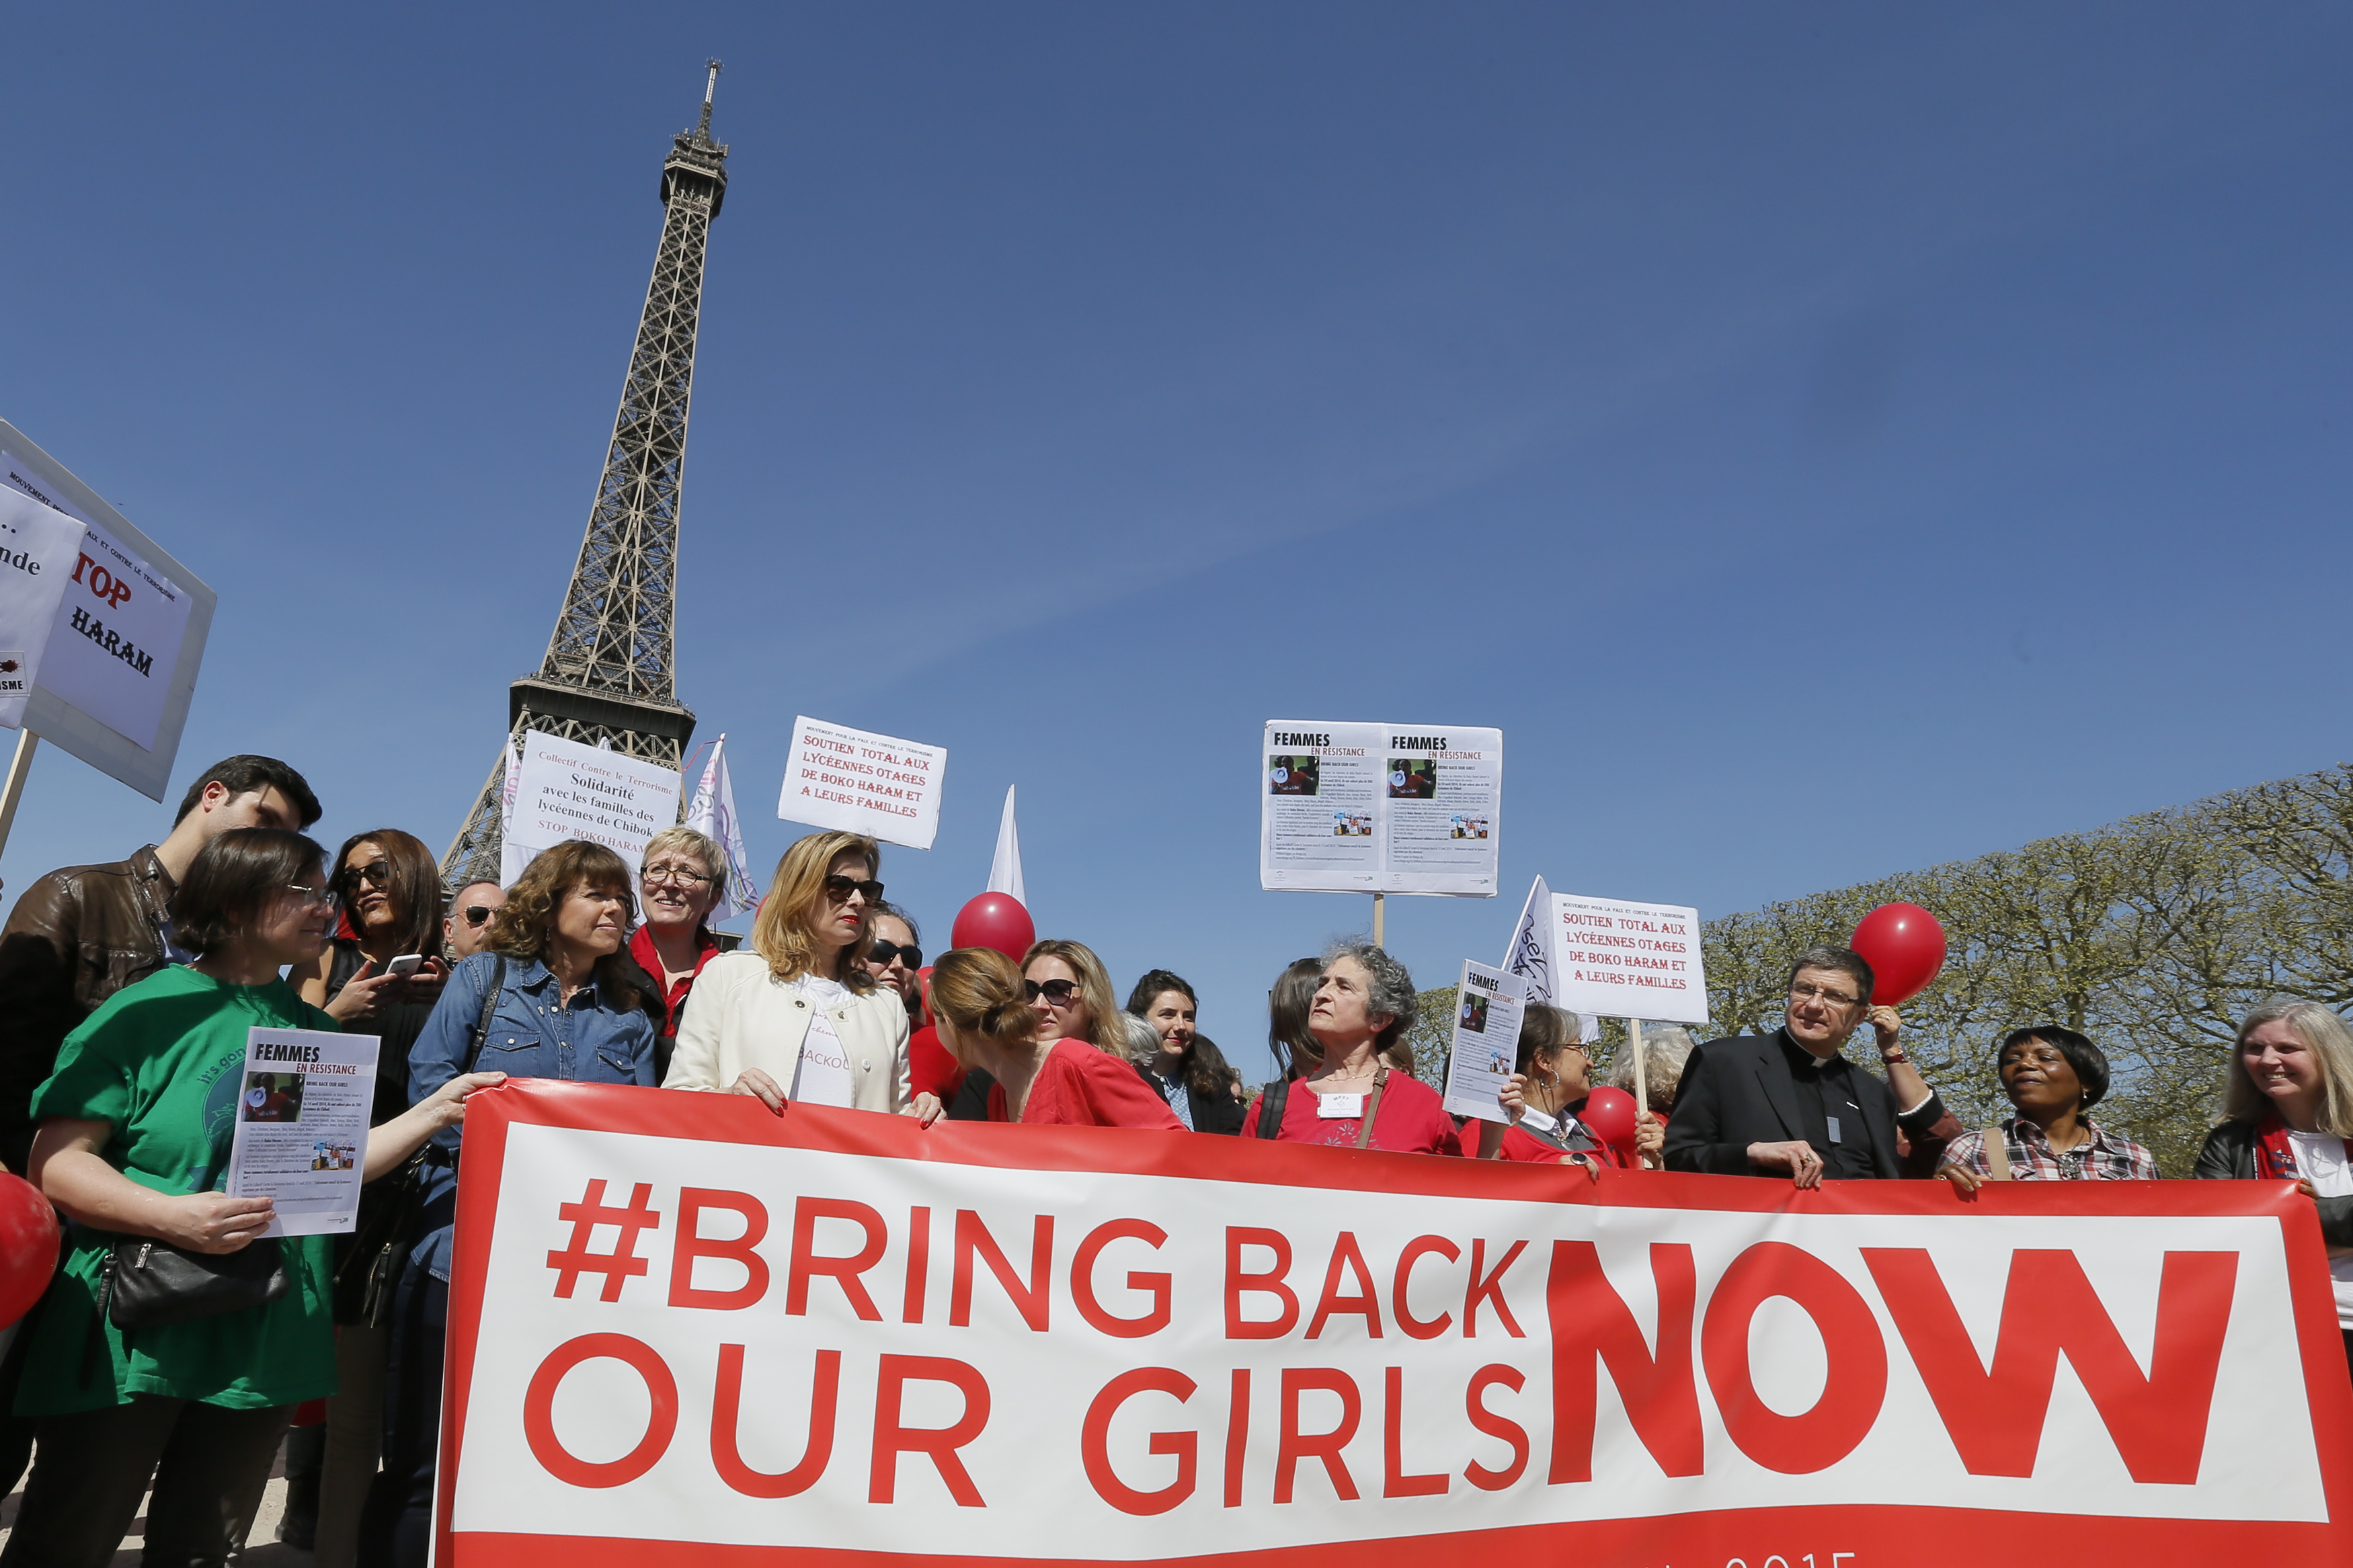 Former French first lady Valerie Trierweiler attends a gathering "Bring Back Our Girls" near the Eiffel Tower in Paris on April 14, 2015 to mark one year since more than 200 schoolgirls were kidnapped in Chibok, north-eastern Nigeria, by Nigerian Islamist rebel group Boko Haram. (Gonzalo Fuentes—Reuters)